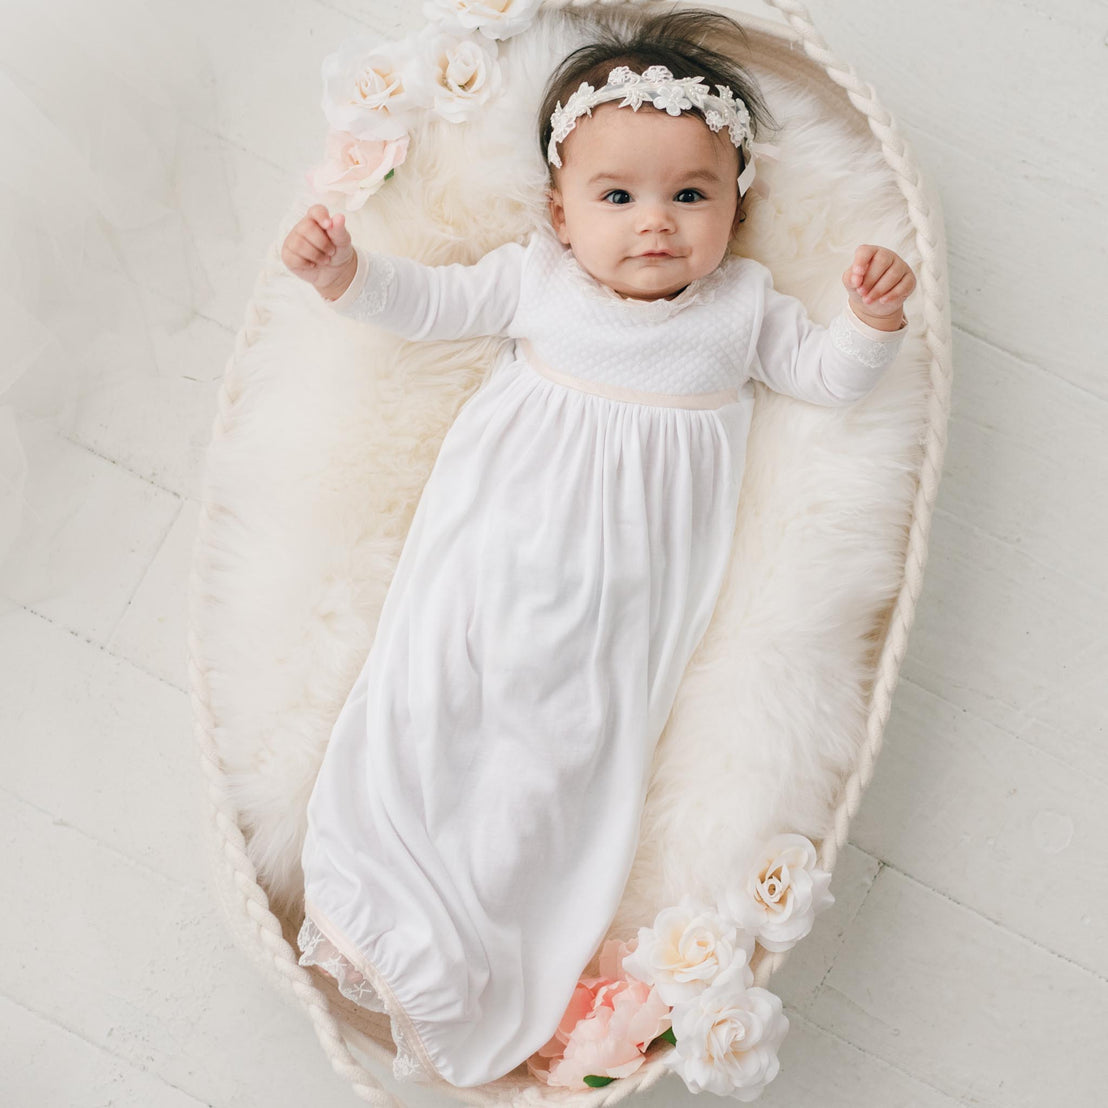 Baby girl wearing the Tessa Quilt Newborn Gown and laying in a crib. The newborn gown is made with soft pima cotton in white and features a plush white quilt bodice with an ivory Venice lace accent along the neck and cuffs.